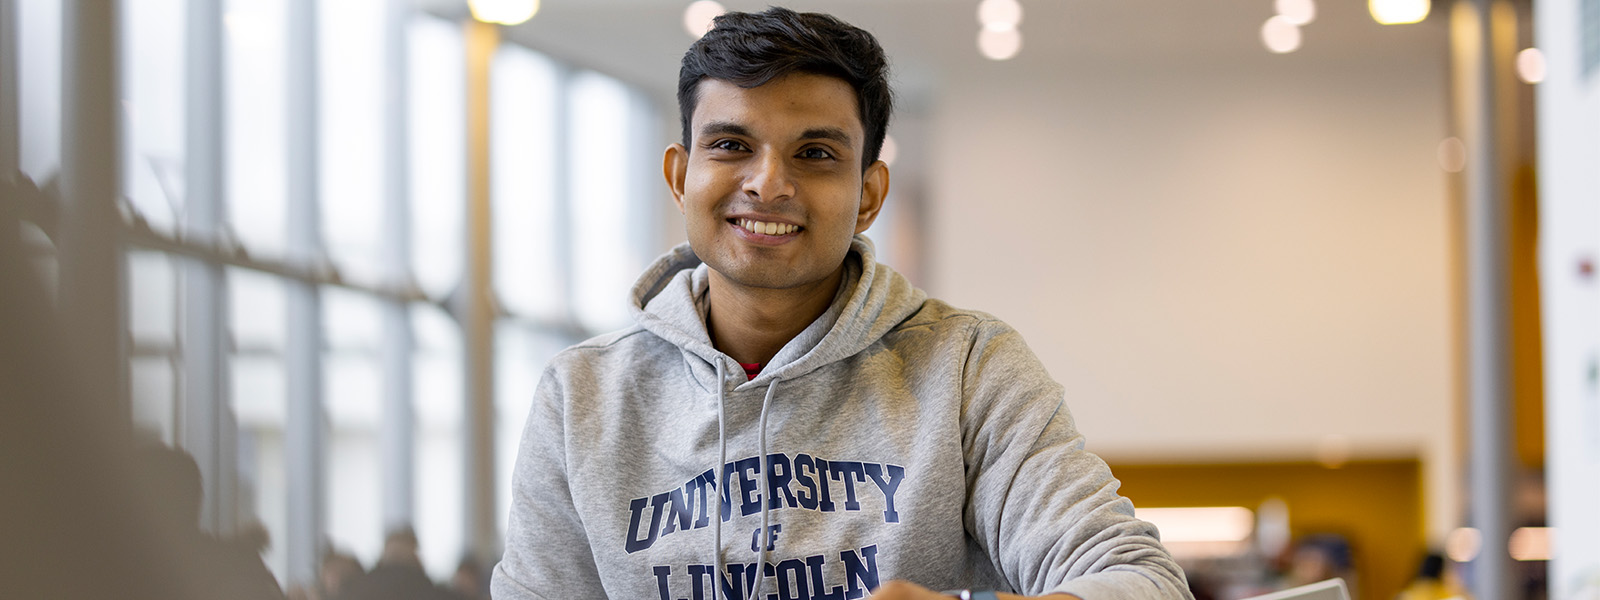 A student in a University of Lincoln jumper